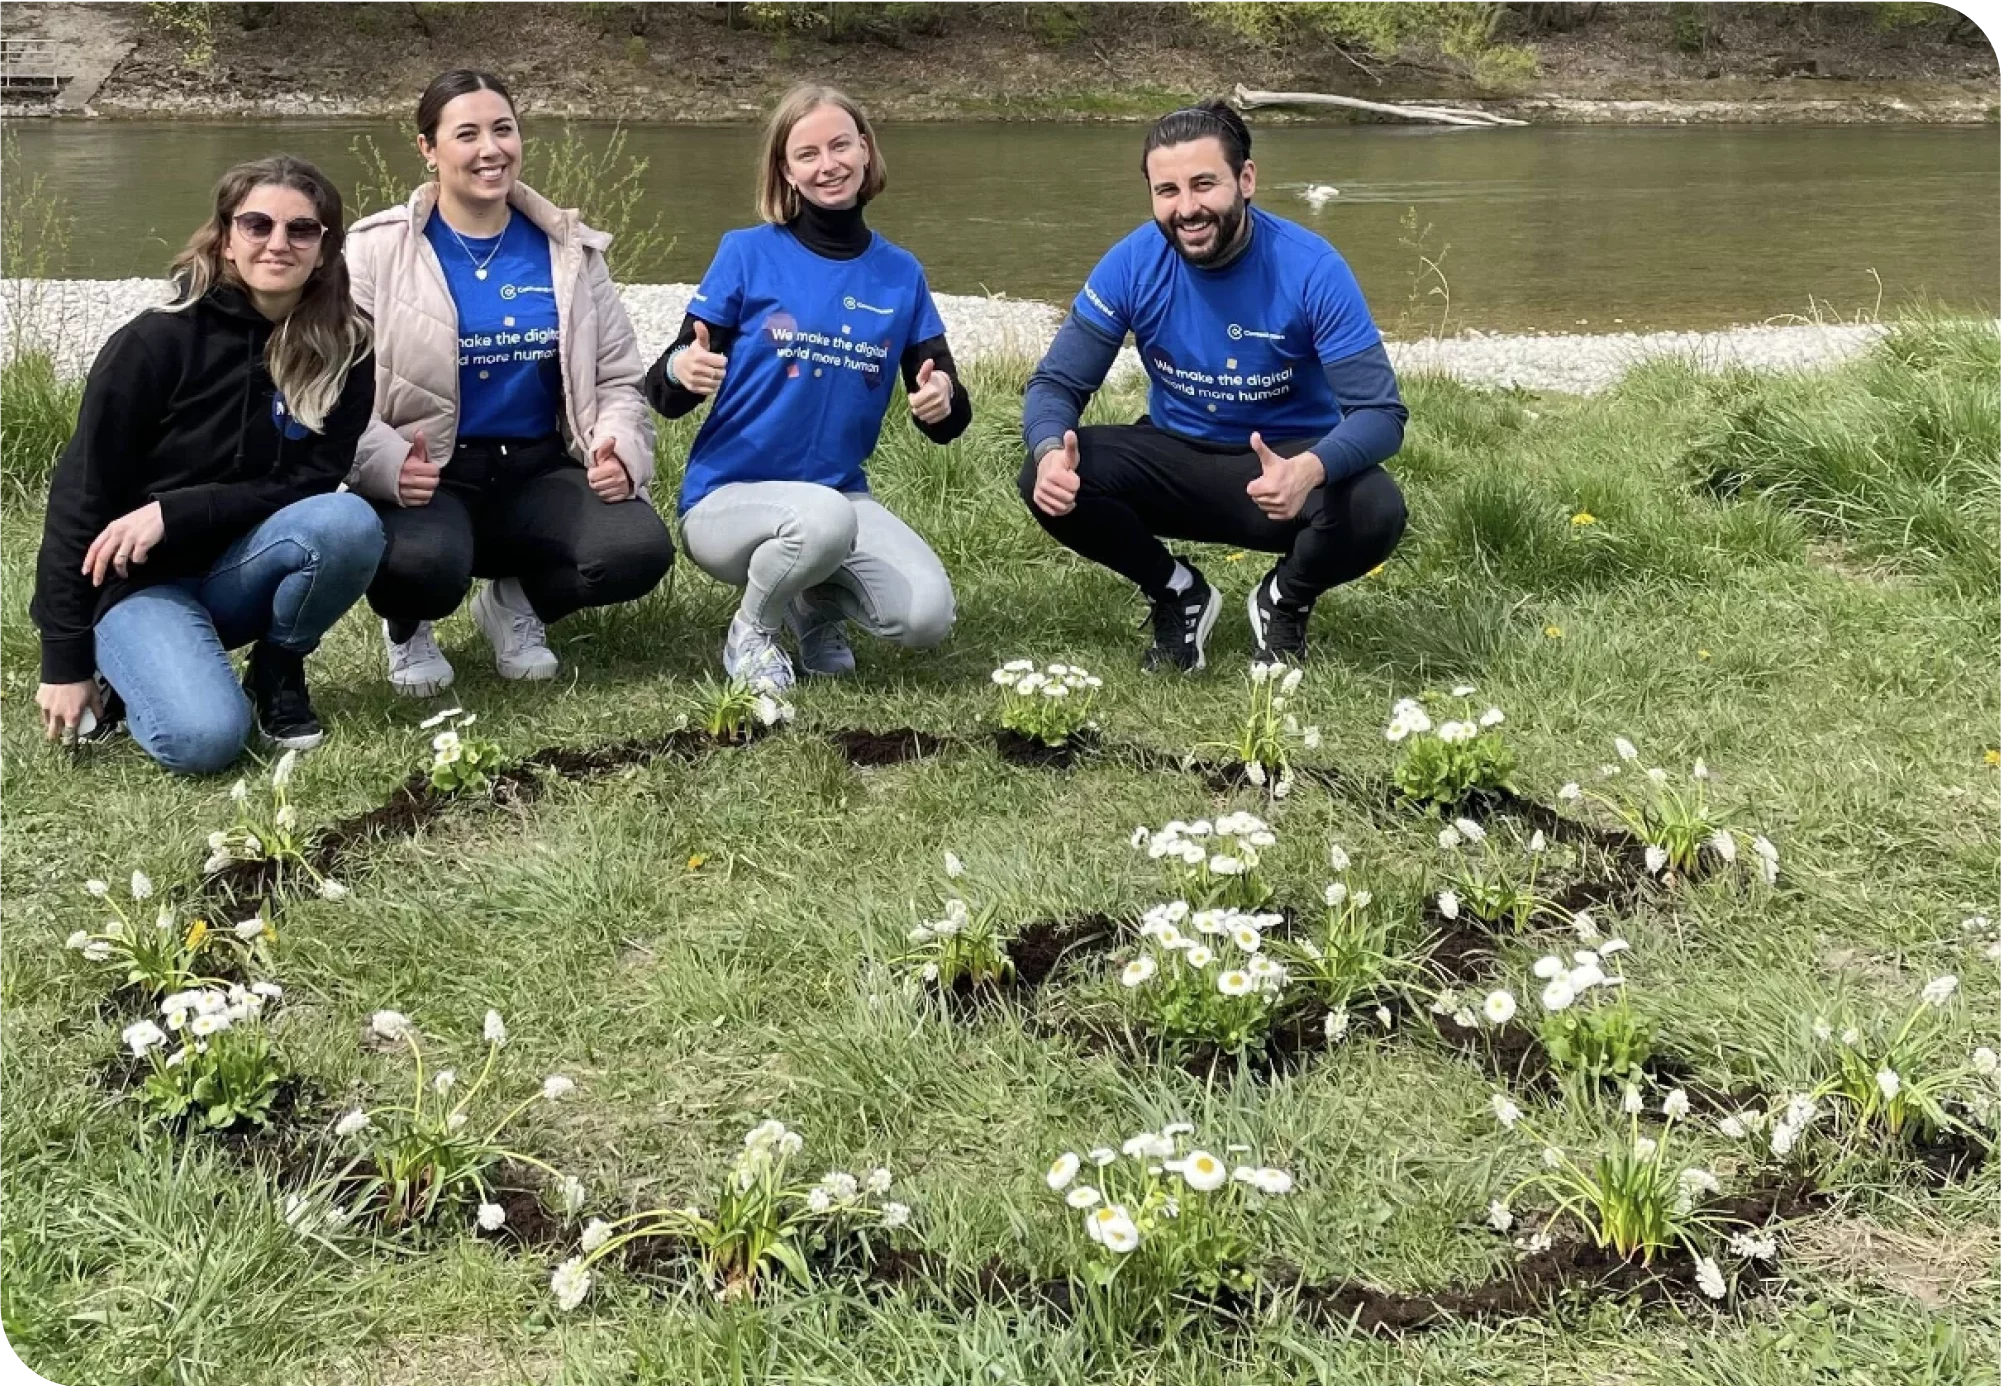 our german team planting flowers in the shape of our logo